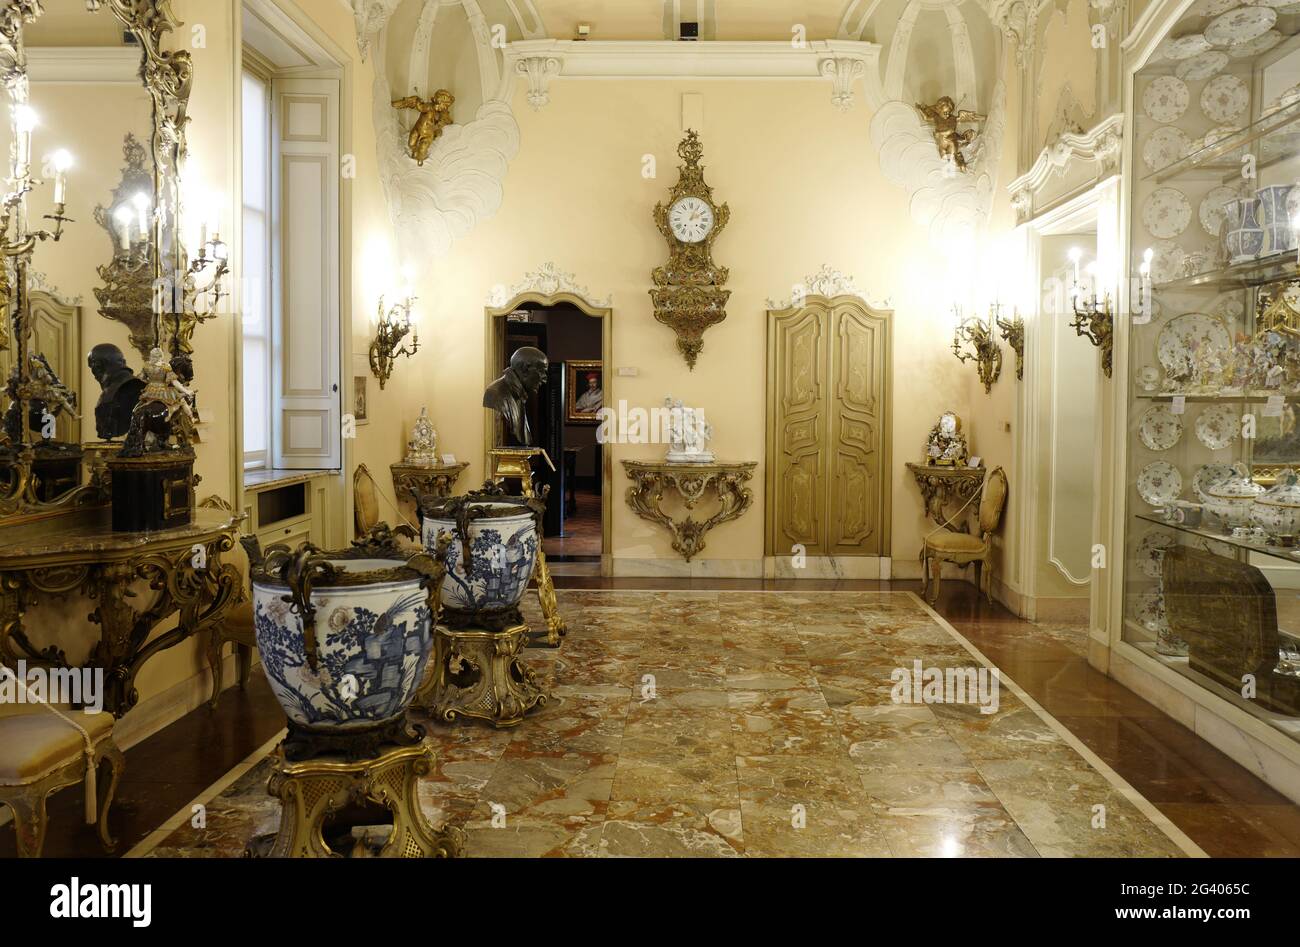 Art collection displayed at the house museum Poldi Pezzoli, on the historical building, in downtown Milan. Stock Photo